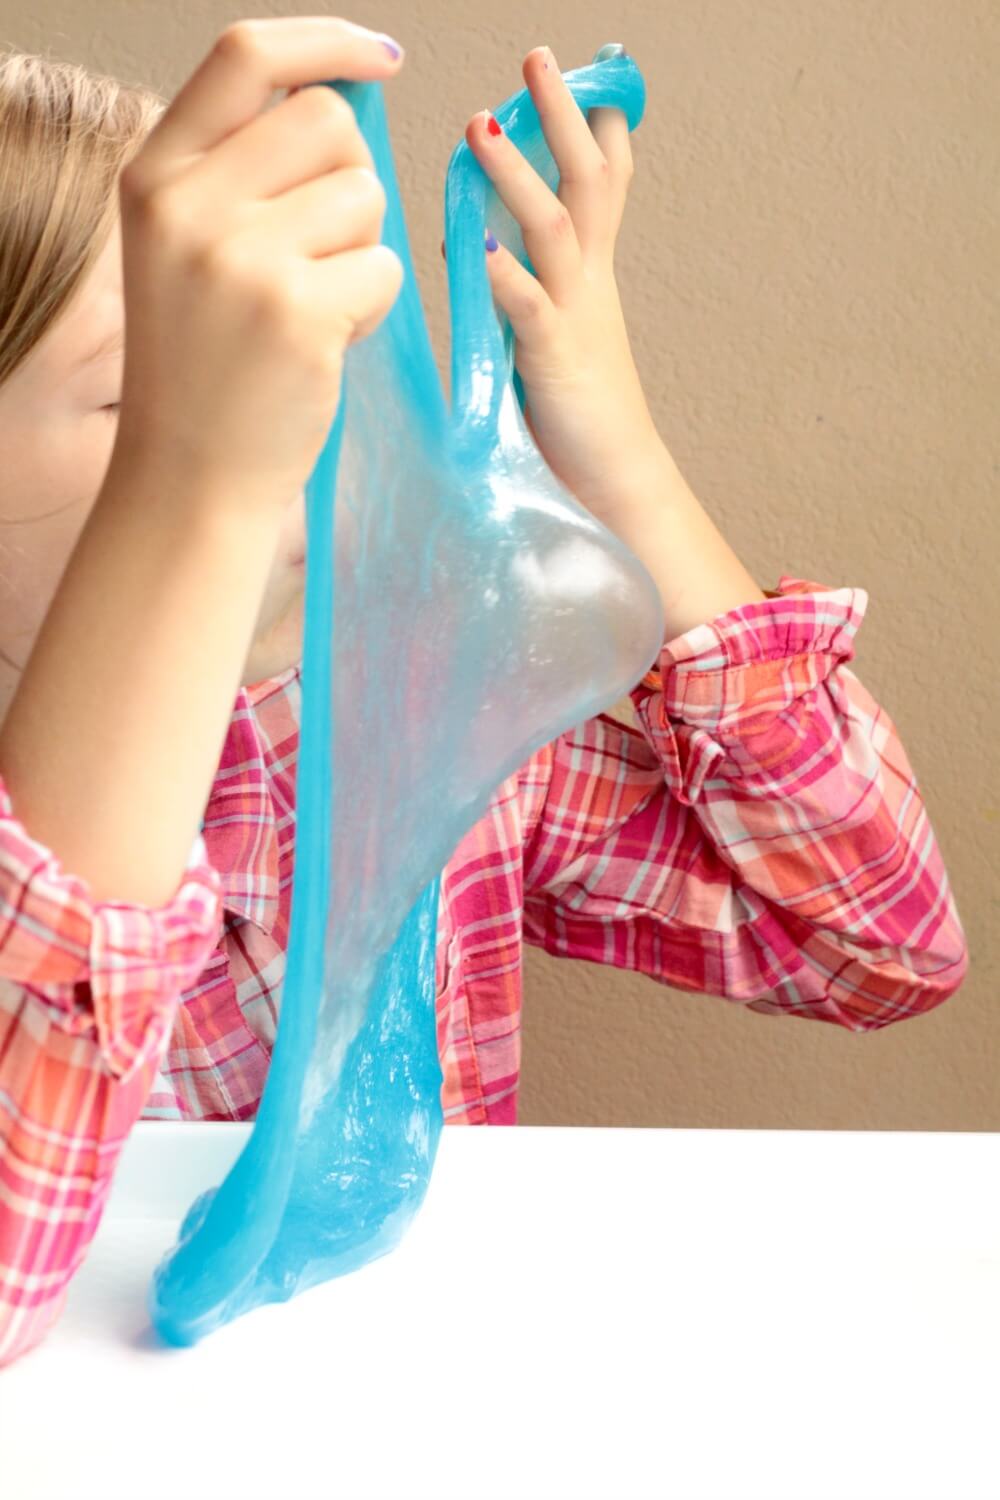 Kids will love this new twist on sensory activities and the science of slime when they make their very own slime bubbles! 